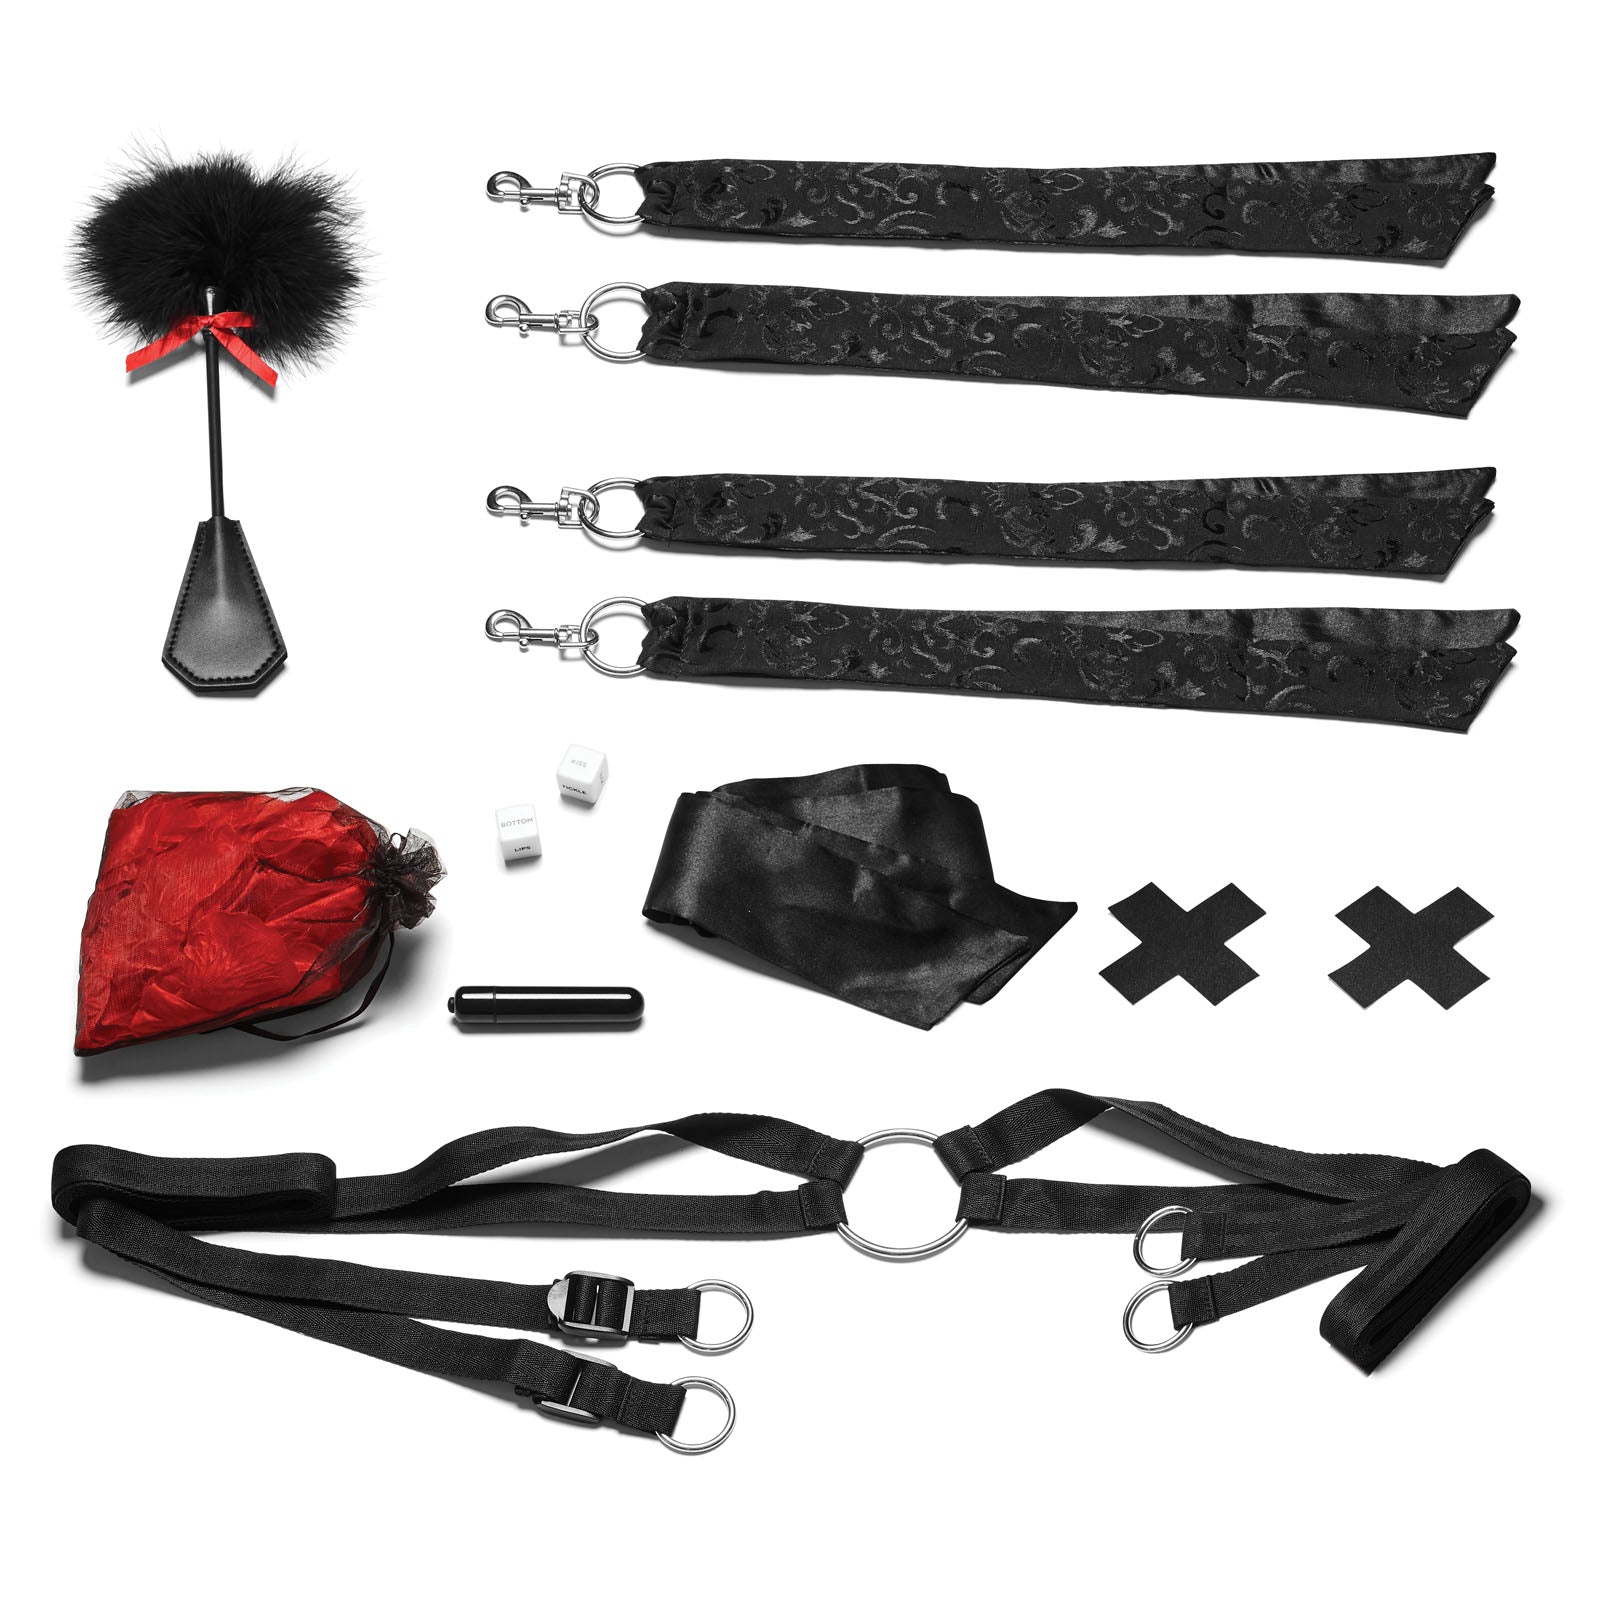 Everything included with the Lux Fetish Night of Romance 6PC Bedspreader and Bed Restraint Set with Satin Cuffs and Rose Petals at glastoy.com